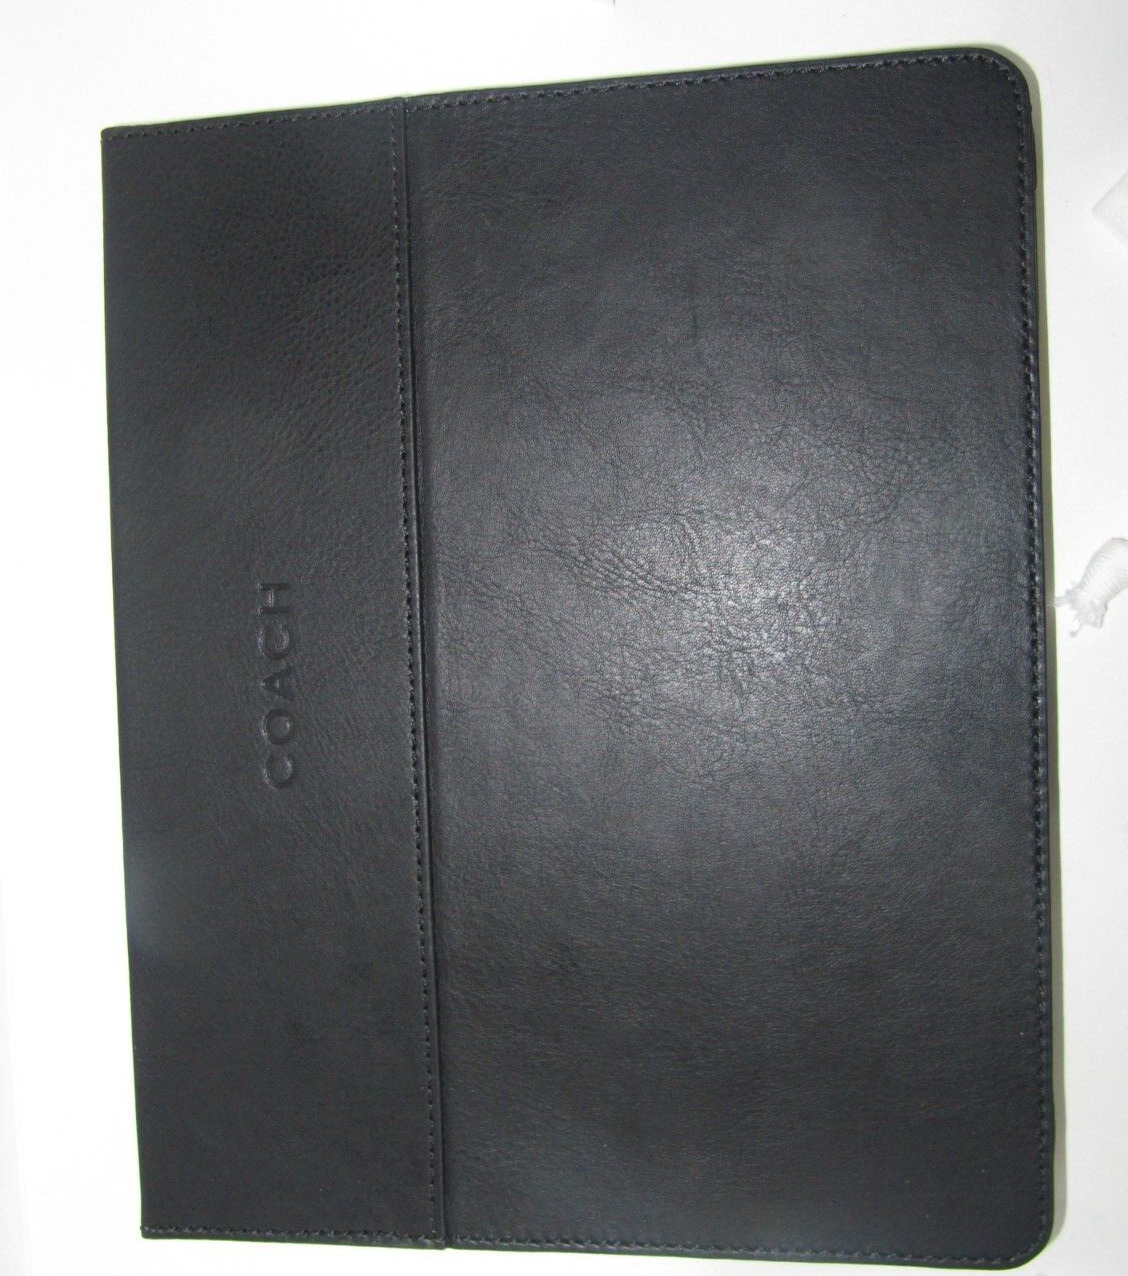 Coach F61309 New Heritage Webbing Black Leather Uni-Sex Tablet Case NWT $198